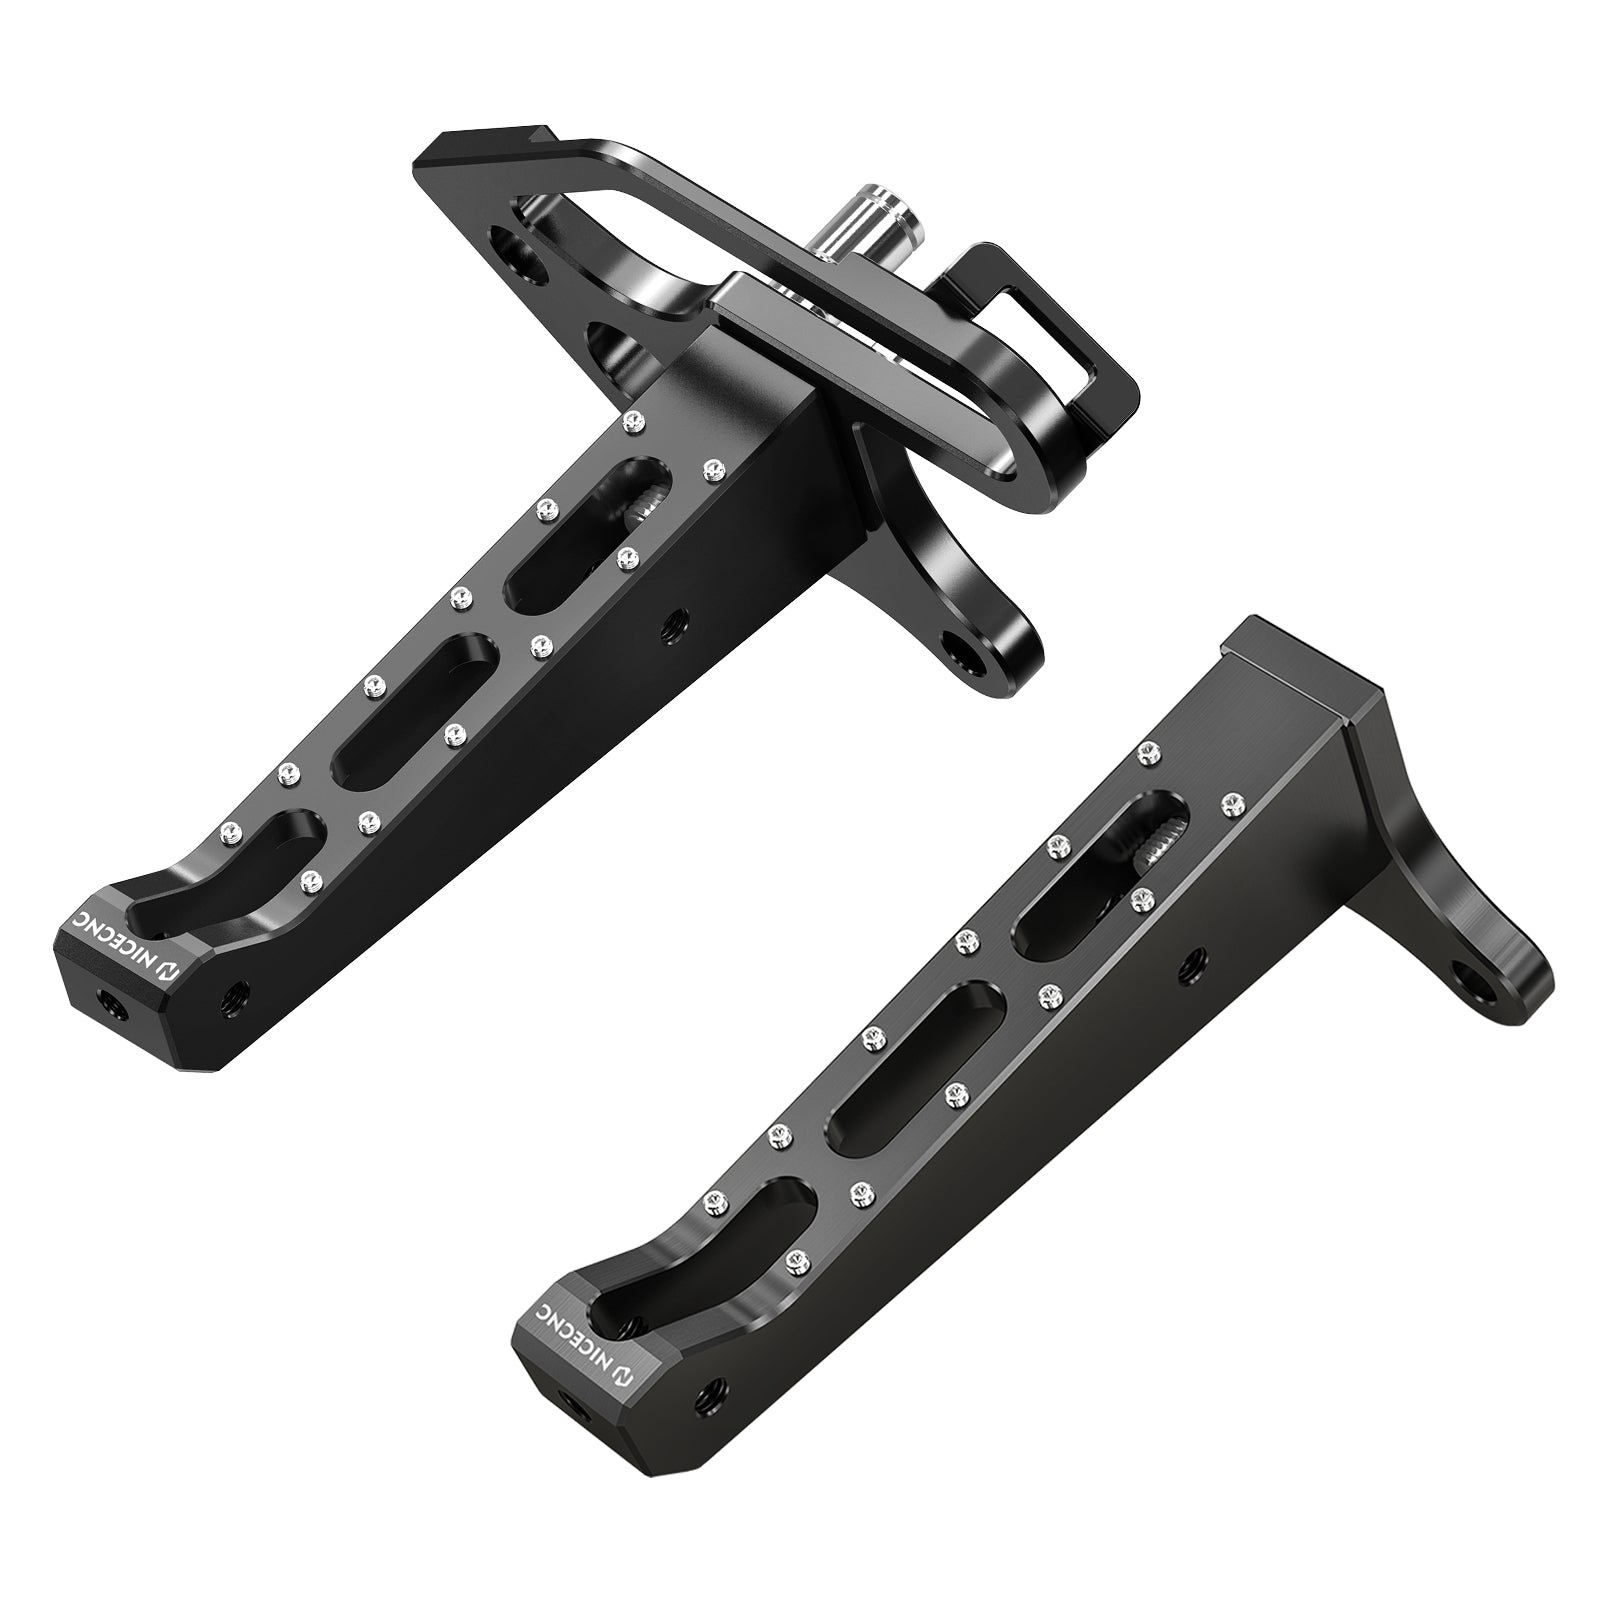 Aluminum Foot Pegs Rest Pedals For Yamaha Blaster 200 1988-2006